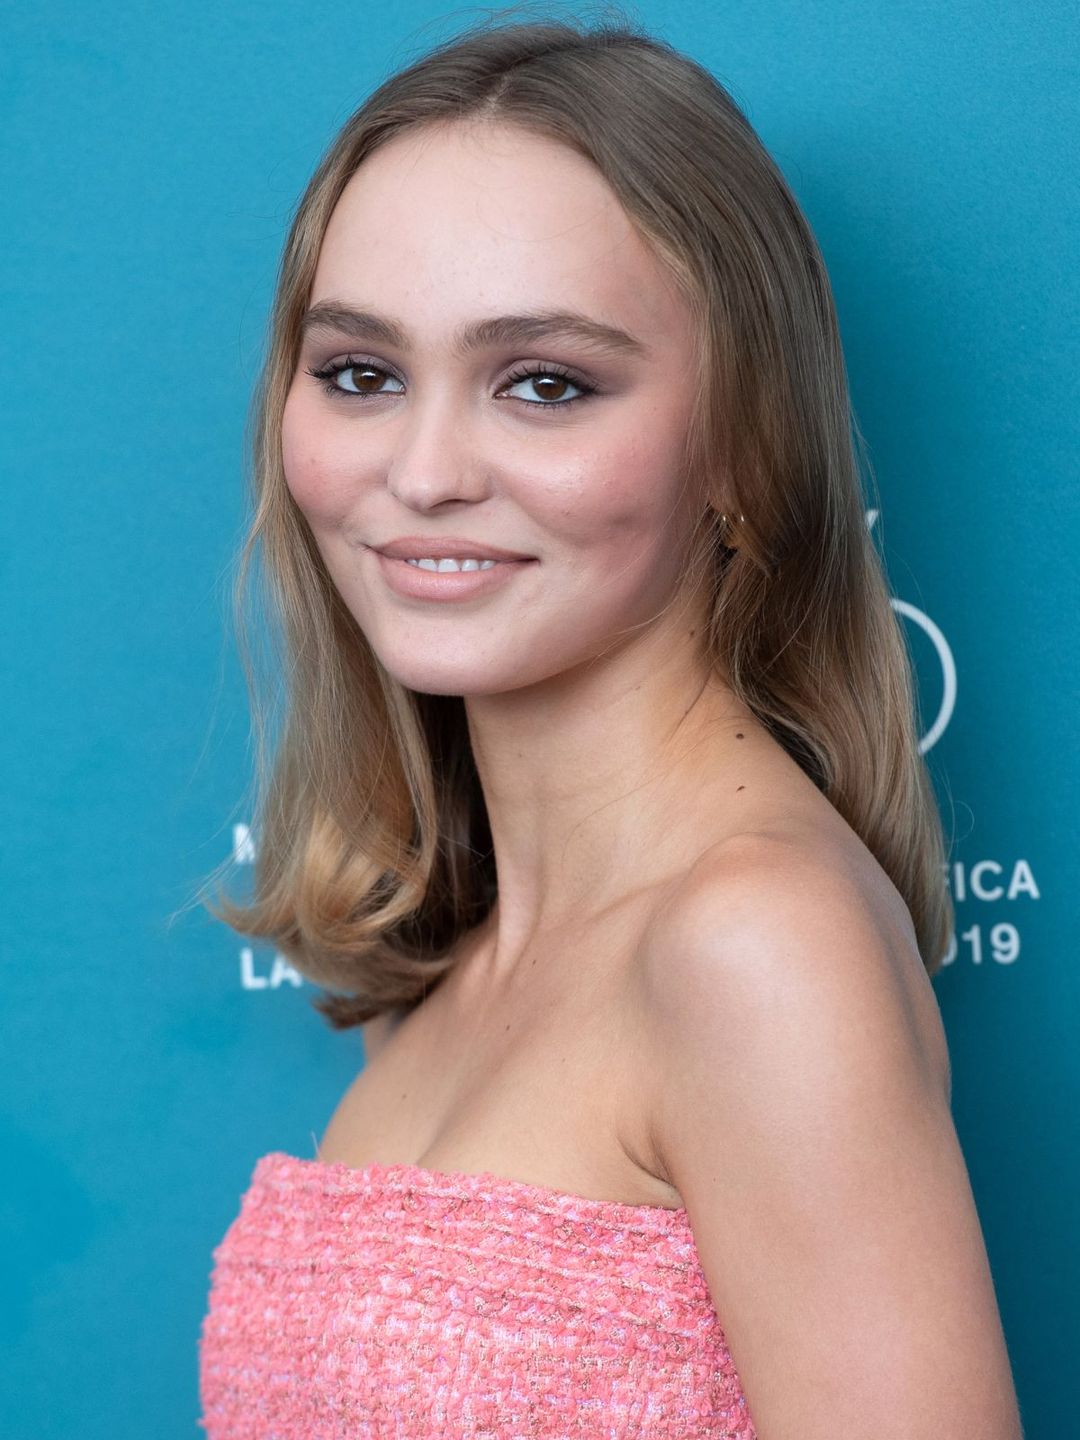 Lily-Rose Melody Depp personal traits